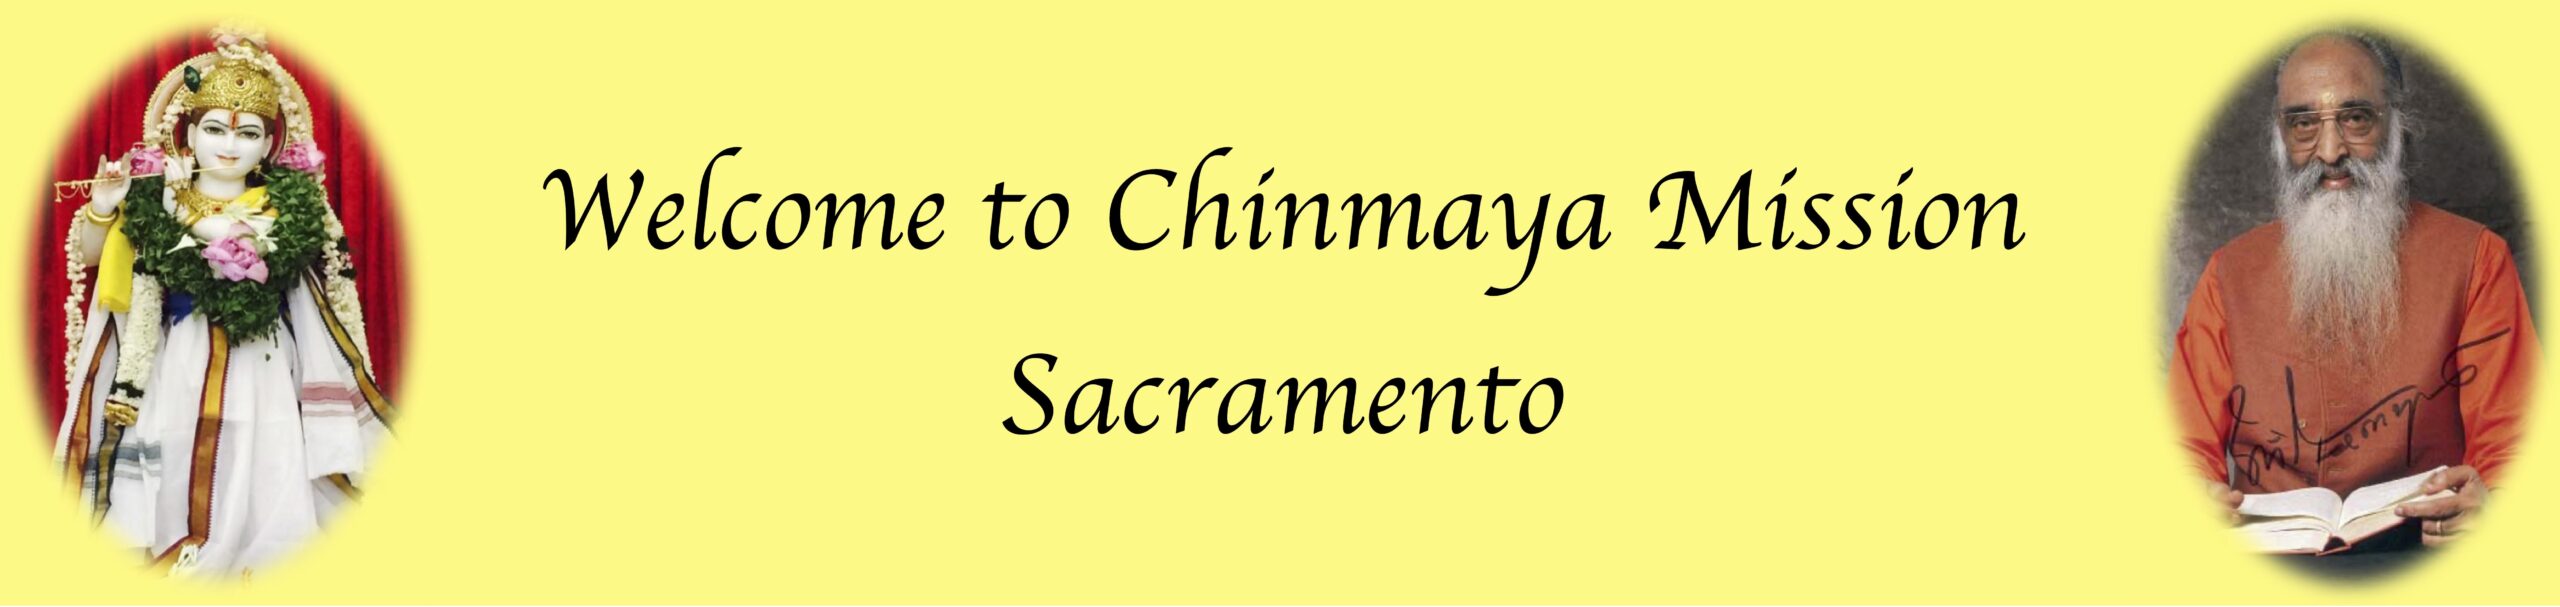 Welcome to Chinmaya Mission Sacramento Center